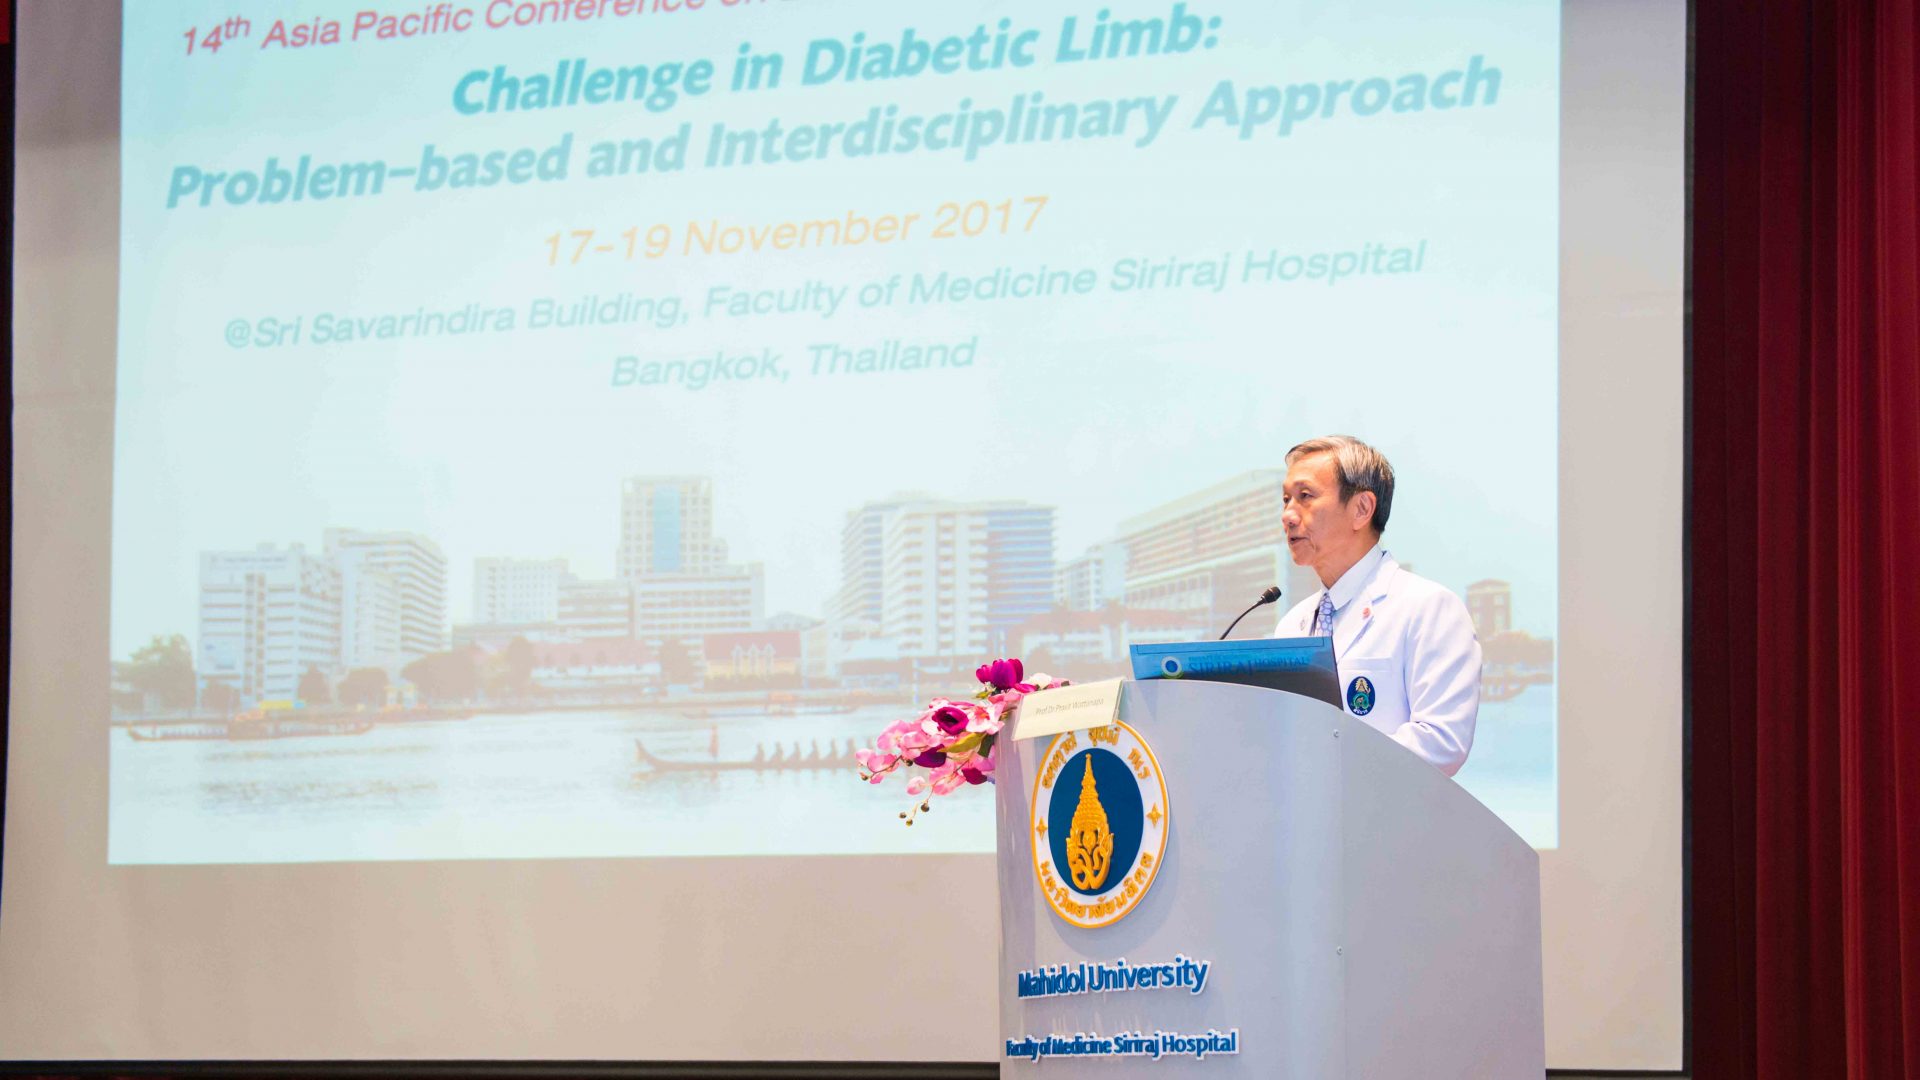 The 14th Asia-Pacific Conference on Diabetic Limb Problems